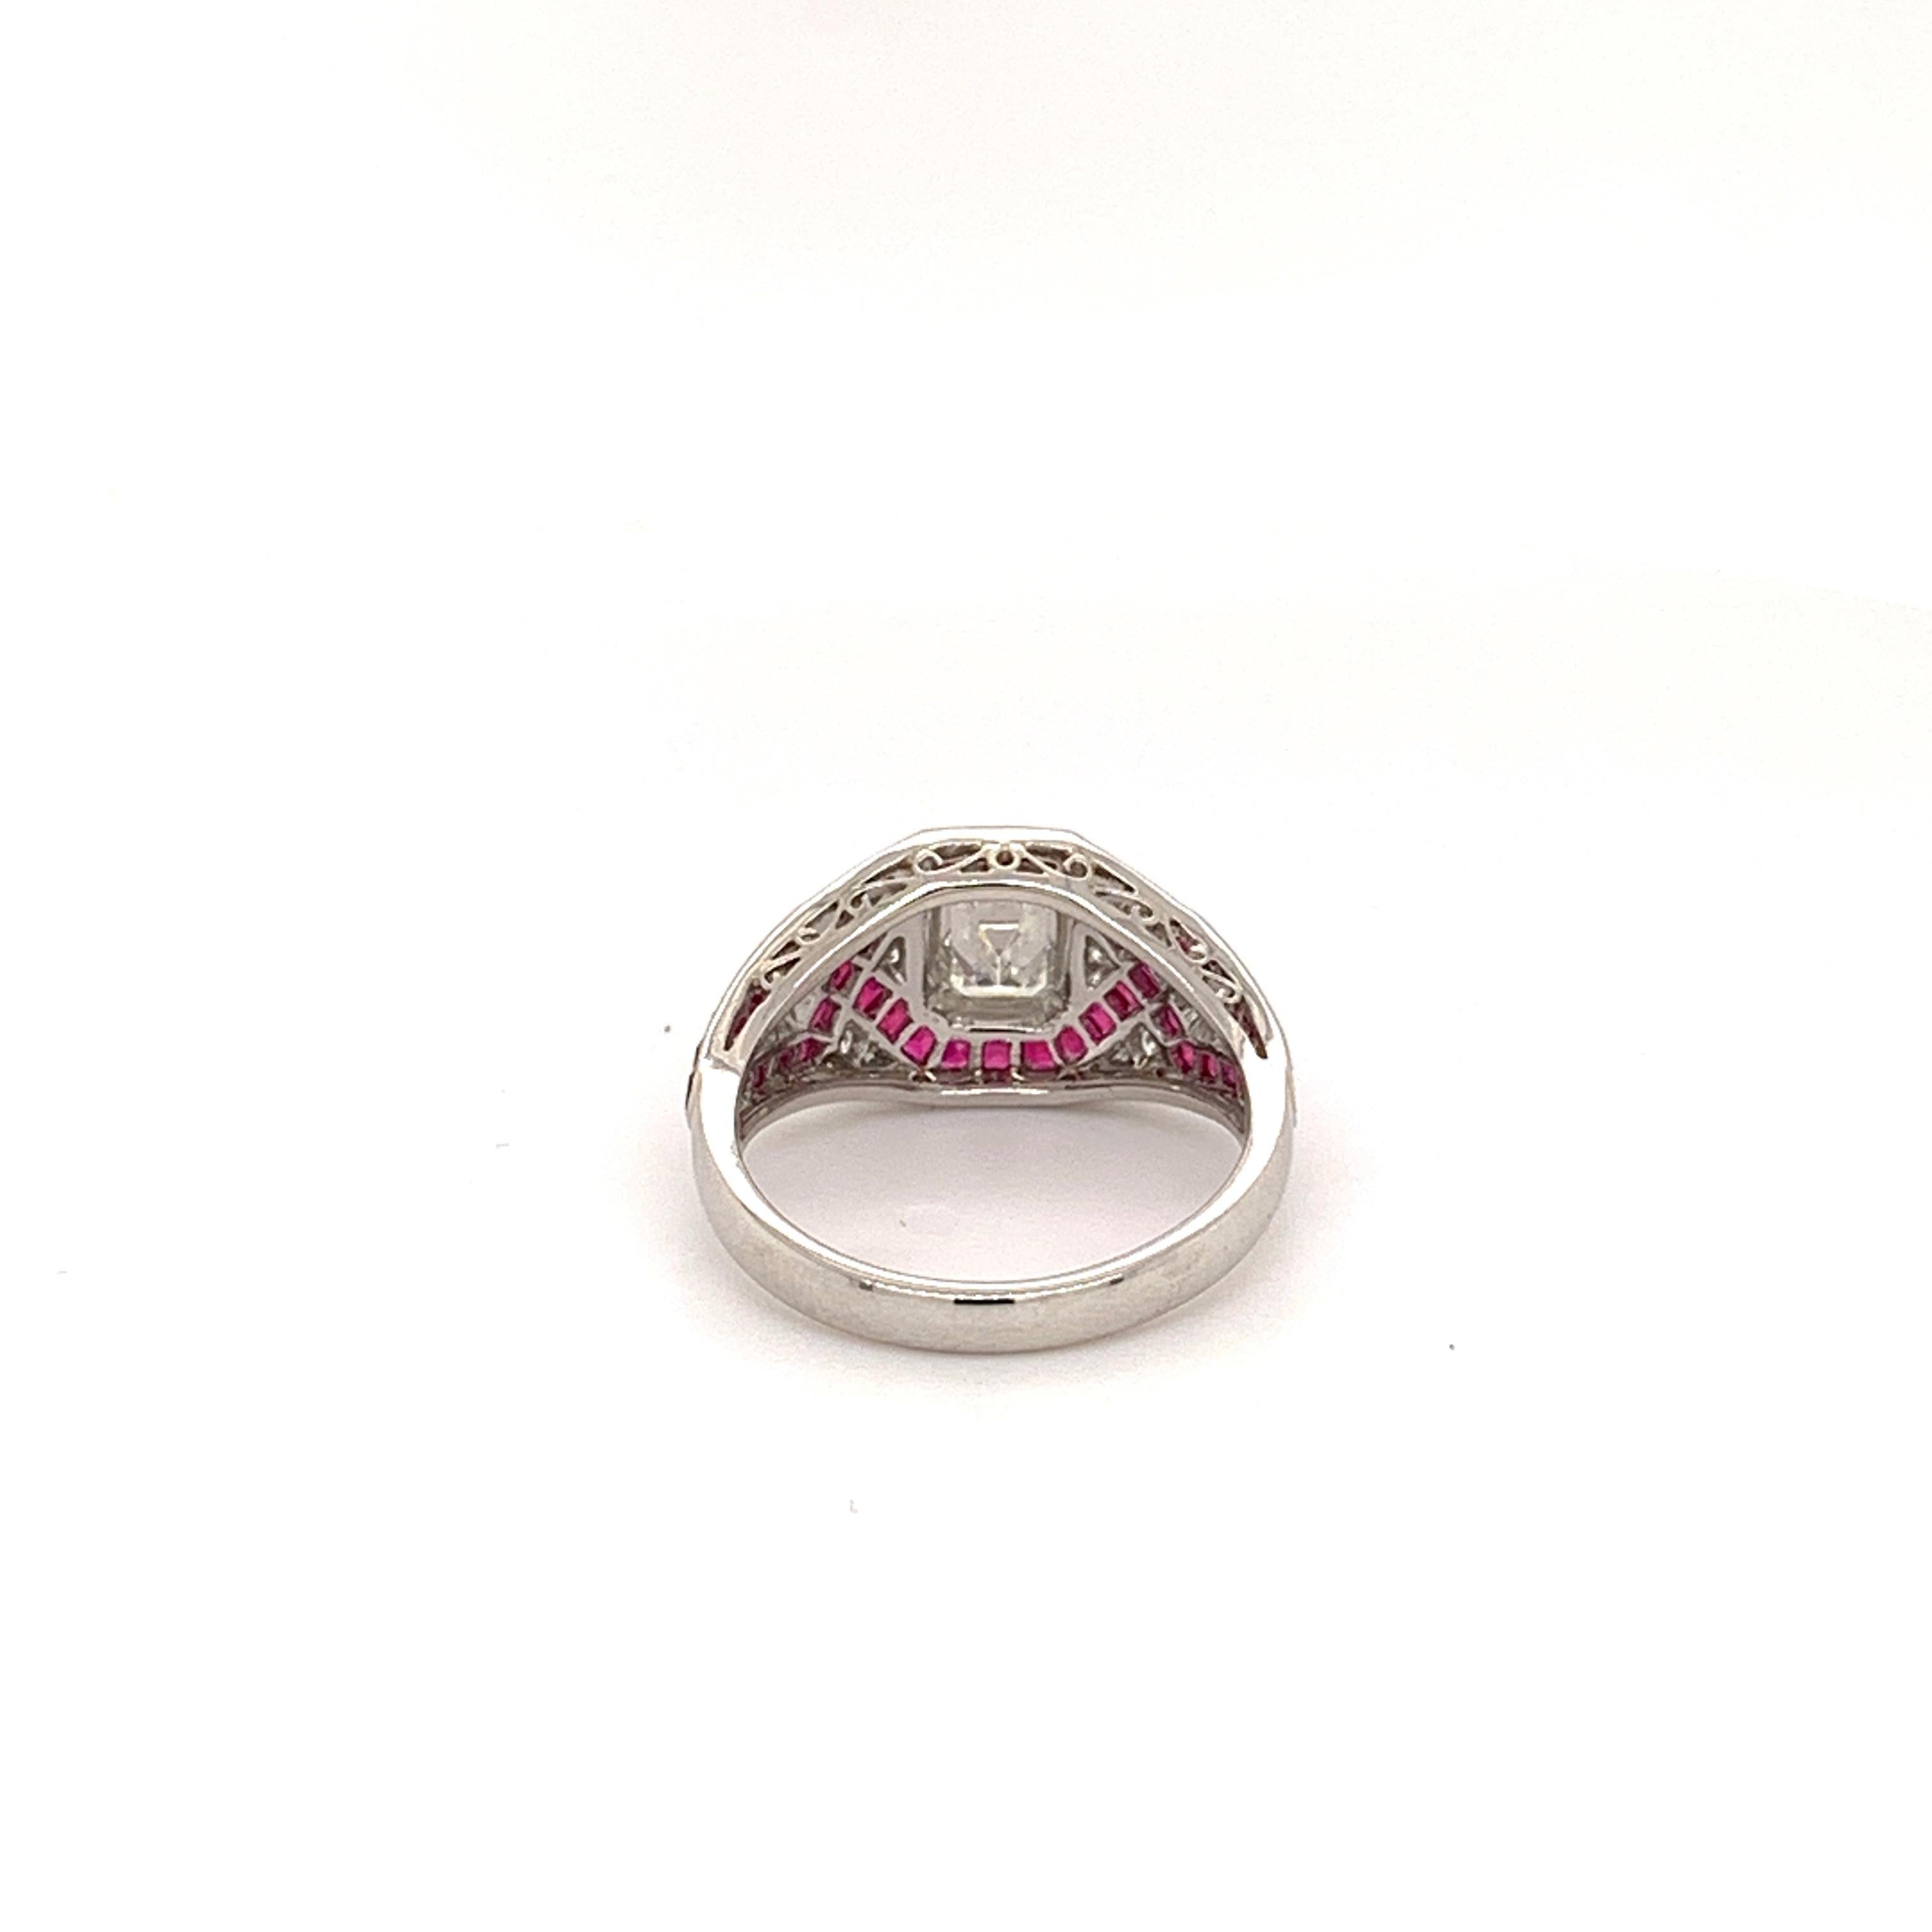 Sophia D. platinum ring that features 0.16 carat center emerald cut stone with ruby stones with a total carat weight of 2.36 and diamonds weighing 0.82 carats.

Sophia D by Joseph Dardashti LTD has been known worldwide for 35 years and are inspired